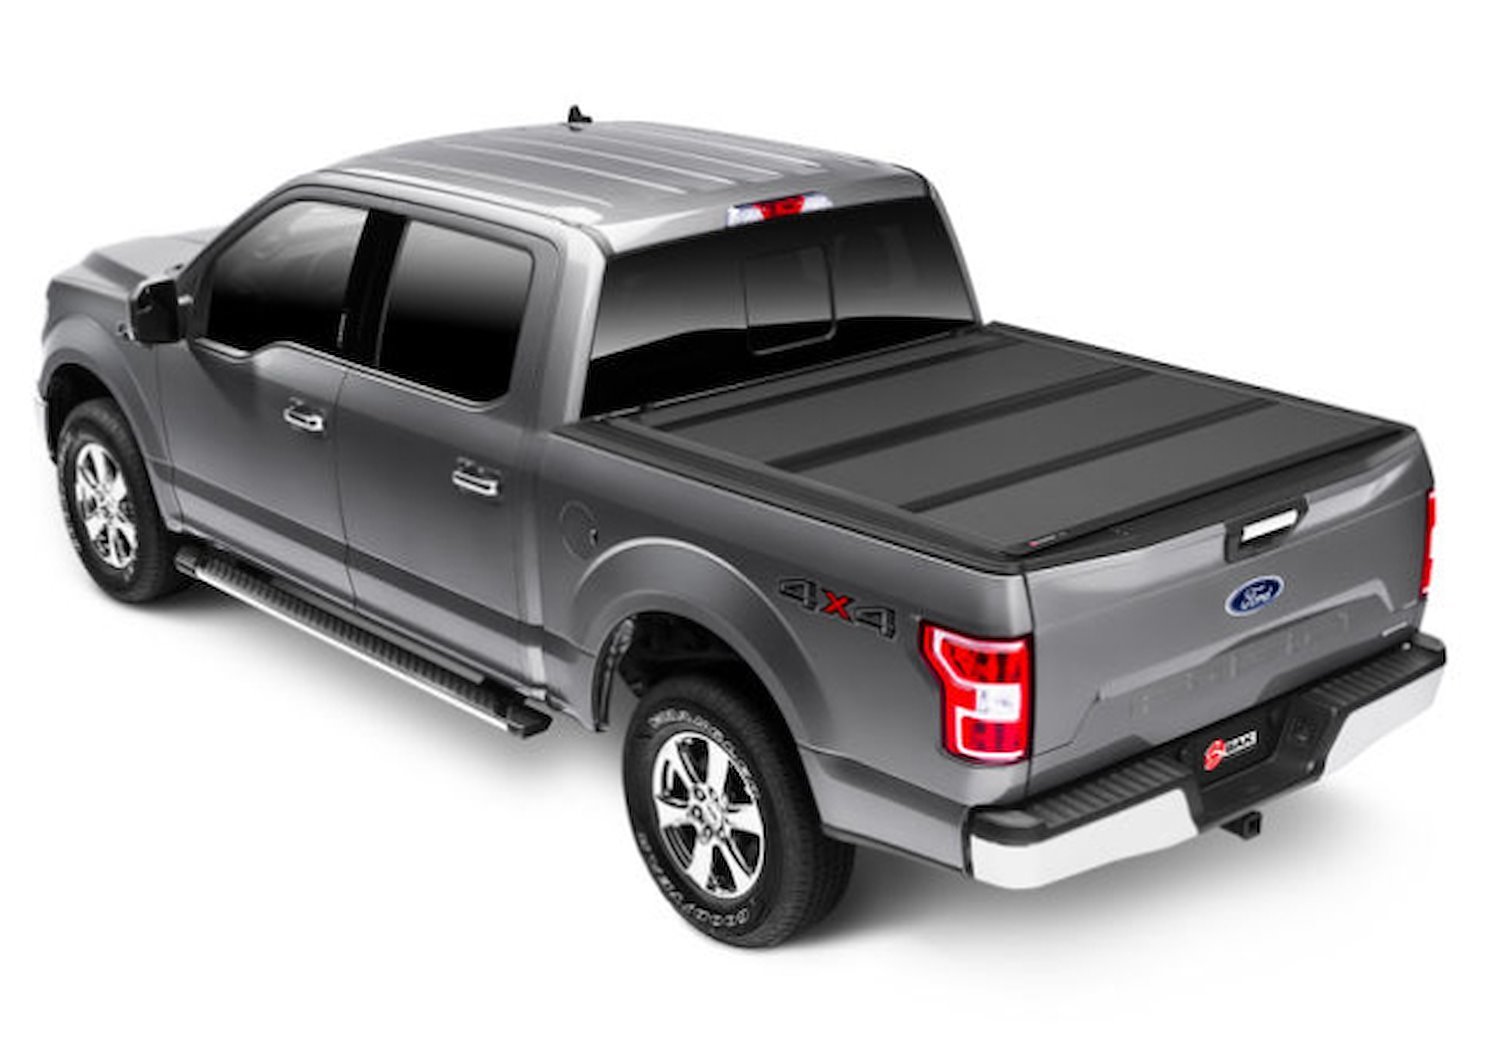 BakFlip MX4 Tonneau Cover Fits Select Ford F-150 [8.2 ft. Bed]